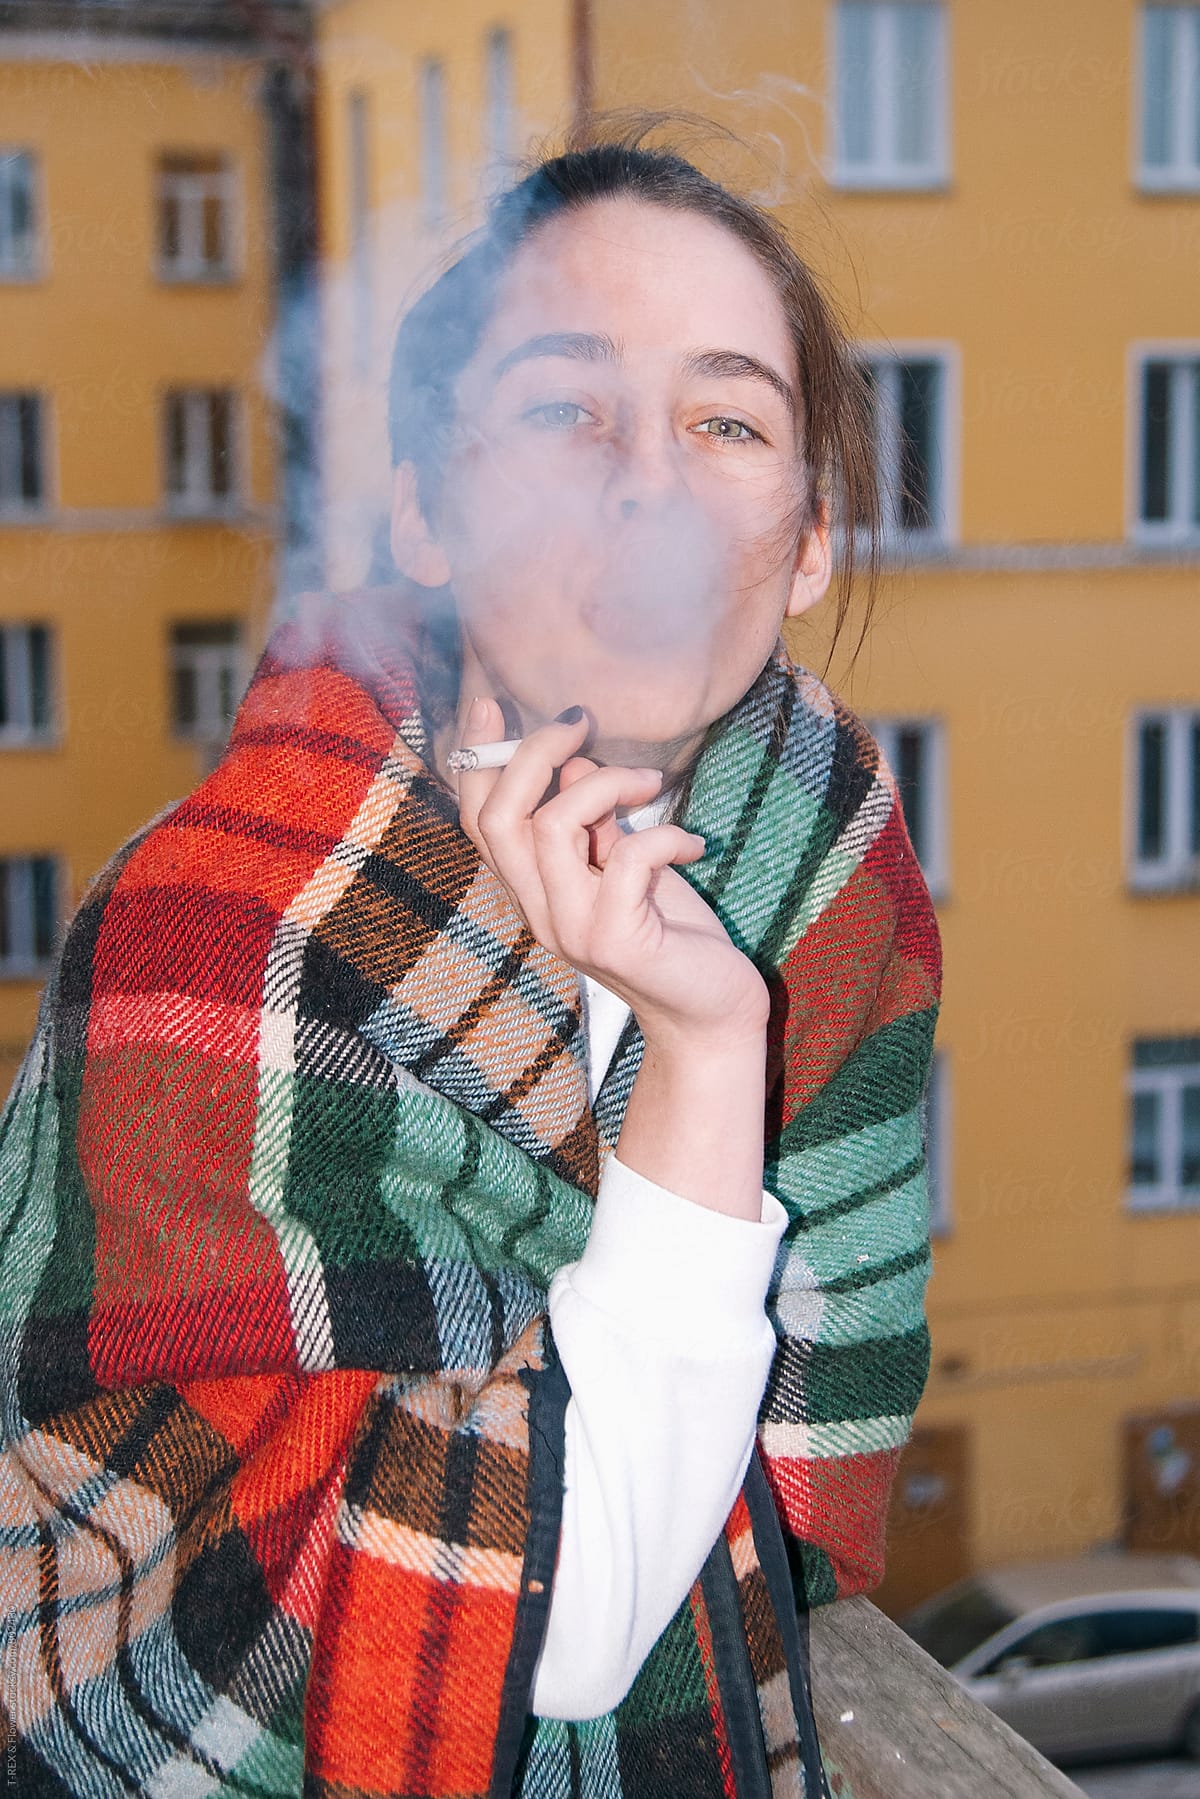 Young woman smoking a cigarette